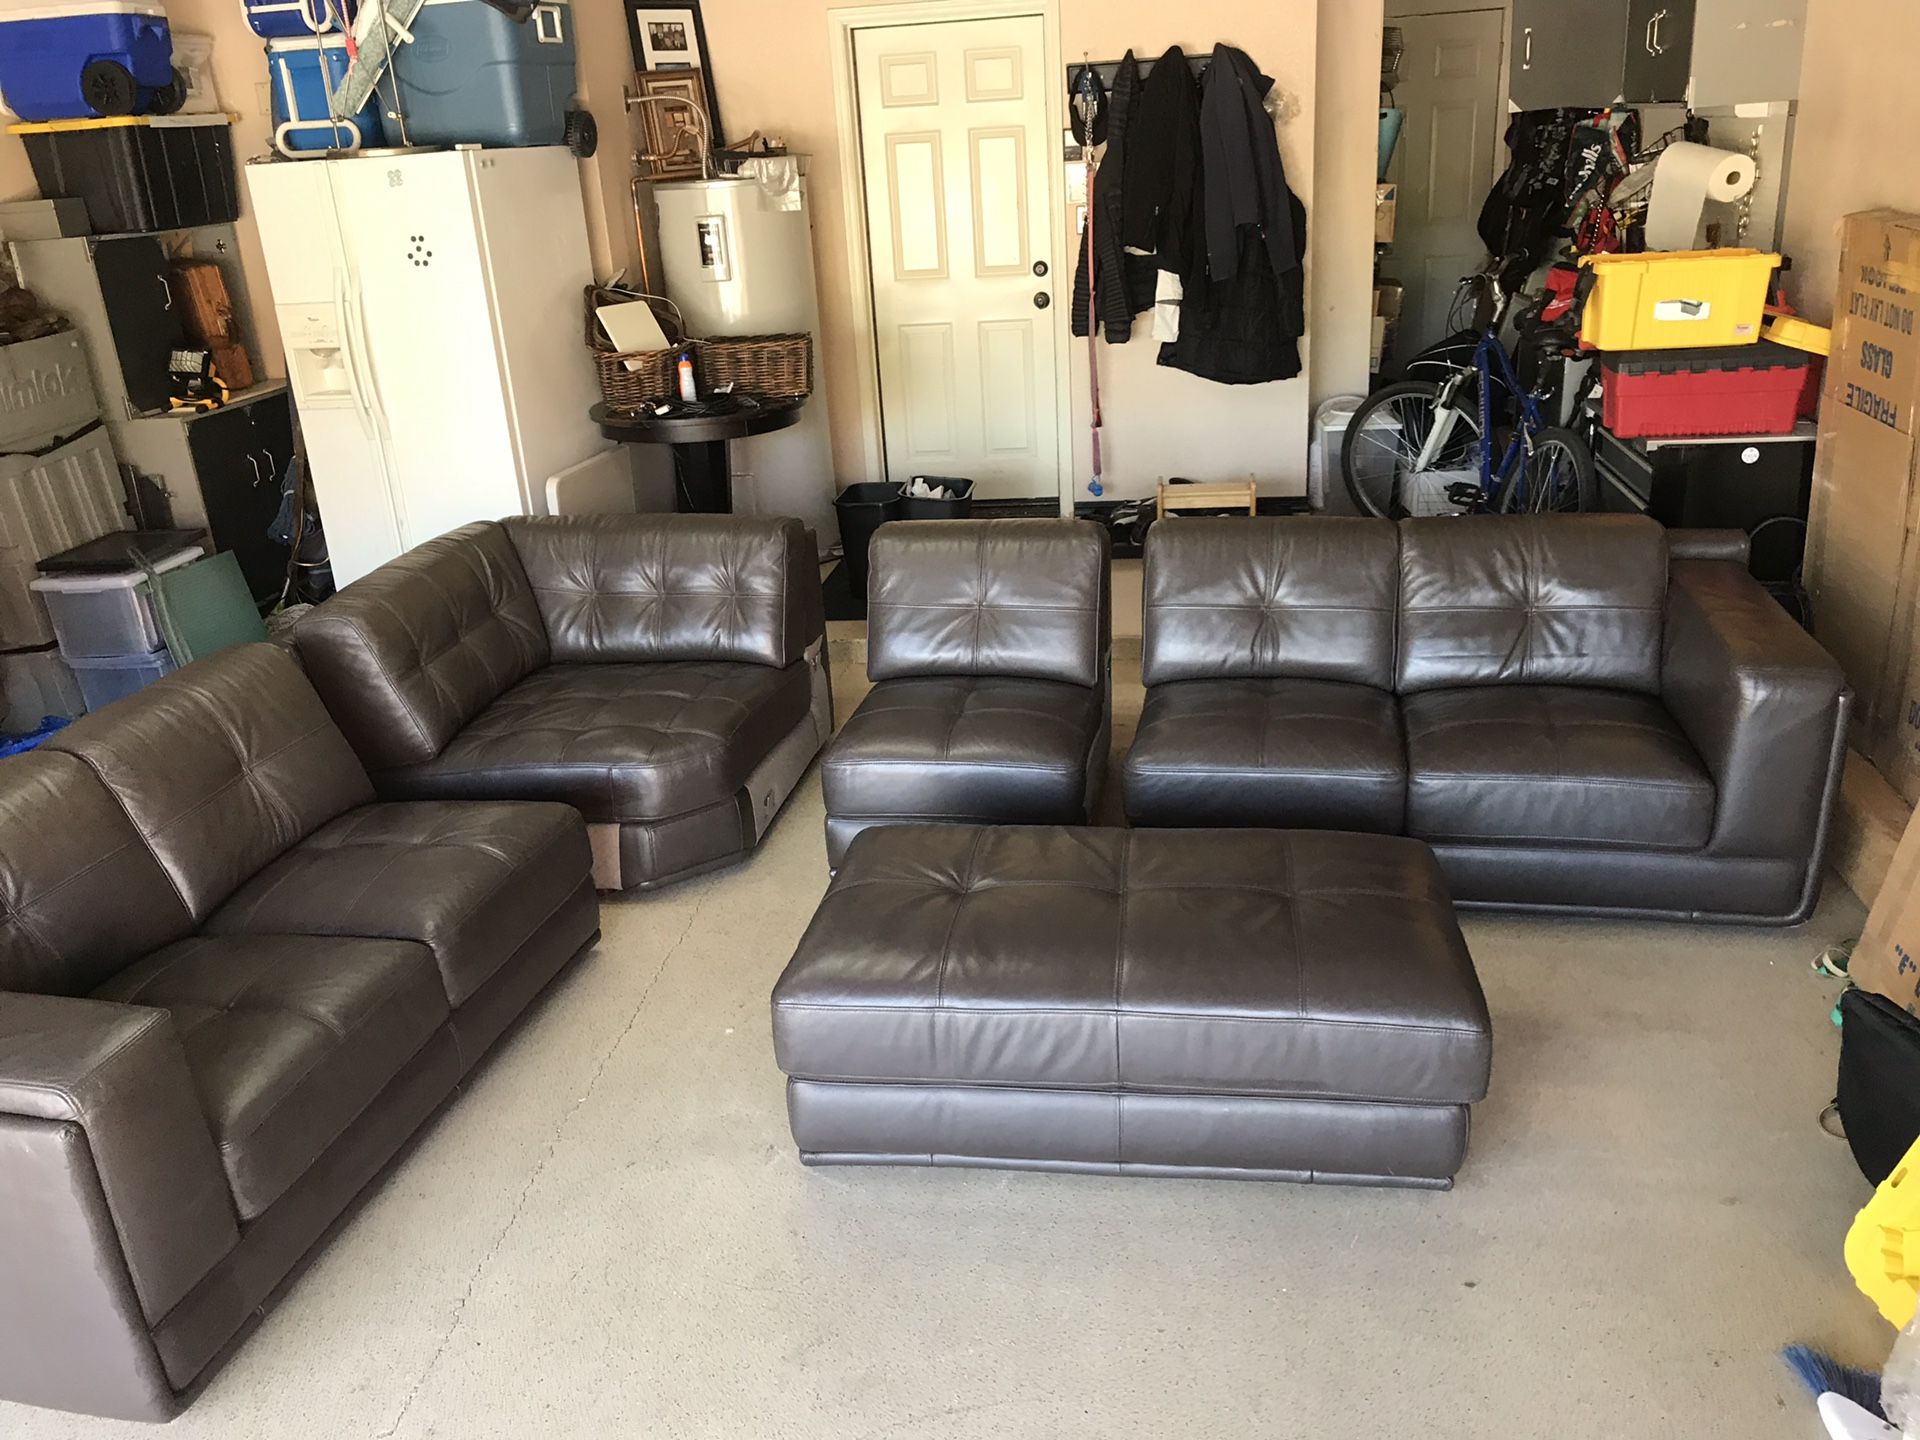 5-piece Sectional Couch, Dark Brown Leather, FREE DELIVERY AND SHIPPING IN THE THE PHX METRO AREA!